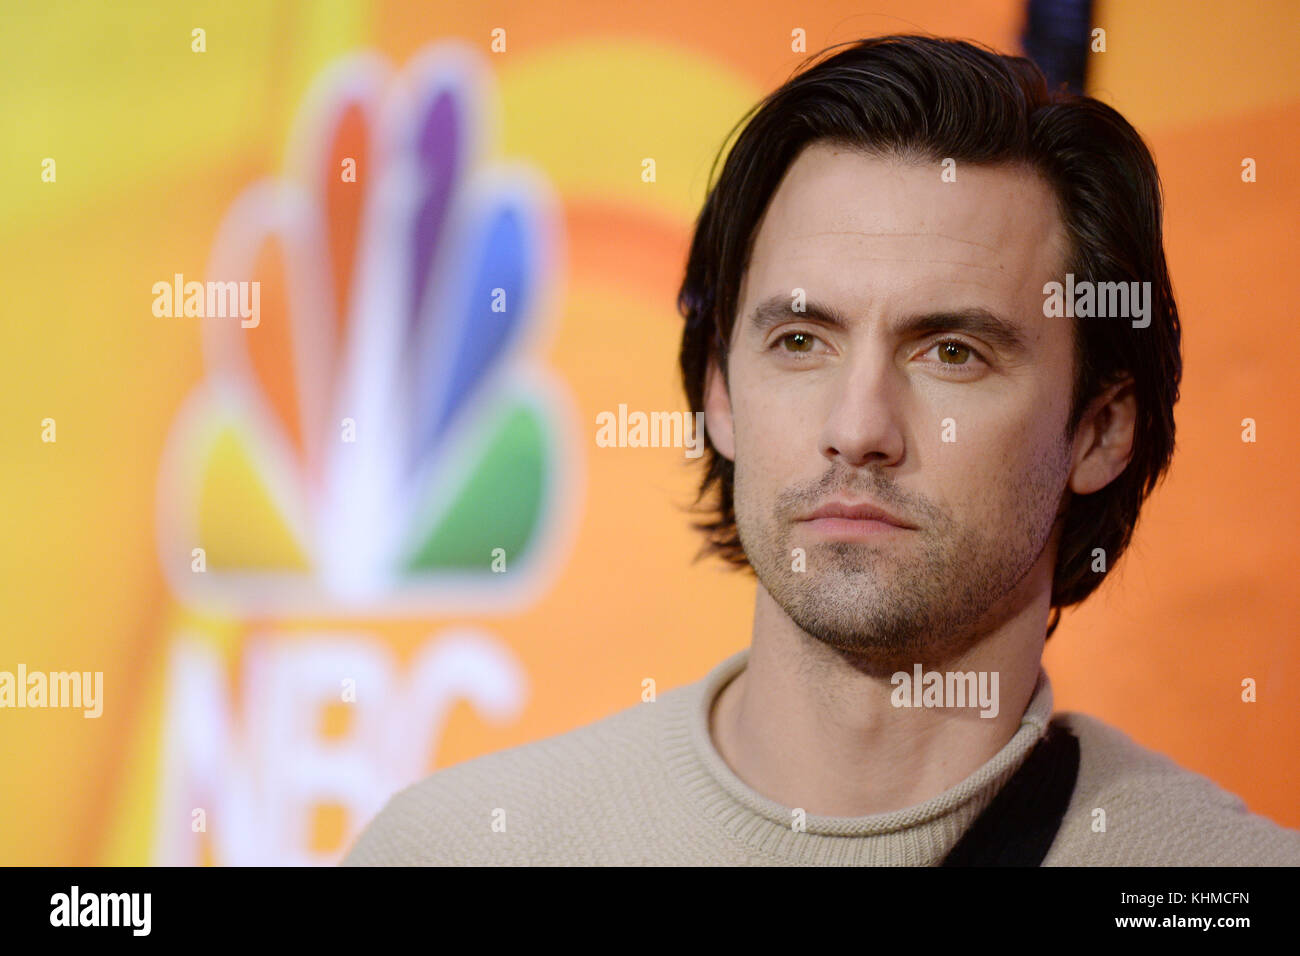 NEW YORK, NY - MARCH 02: Milo Ventimiglia attends the NBCUniversal Press Junket at the Four Seasons Hotel New York on March 2, 2017 in New York City   People:  Milo Ventimiglia  Transmission Ref:  MNC76 Stock Photo